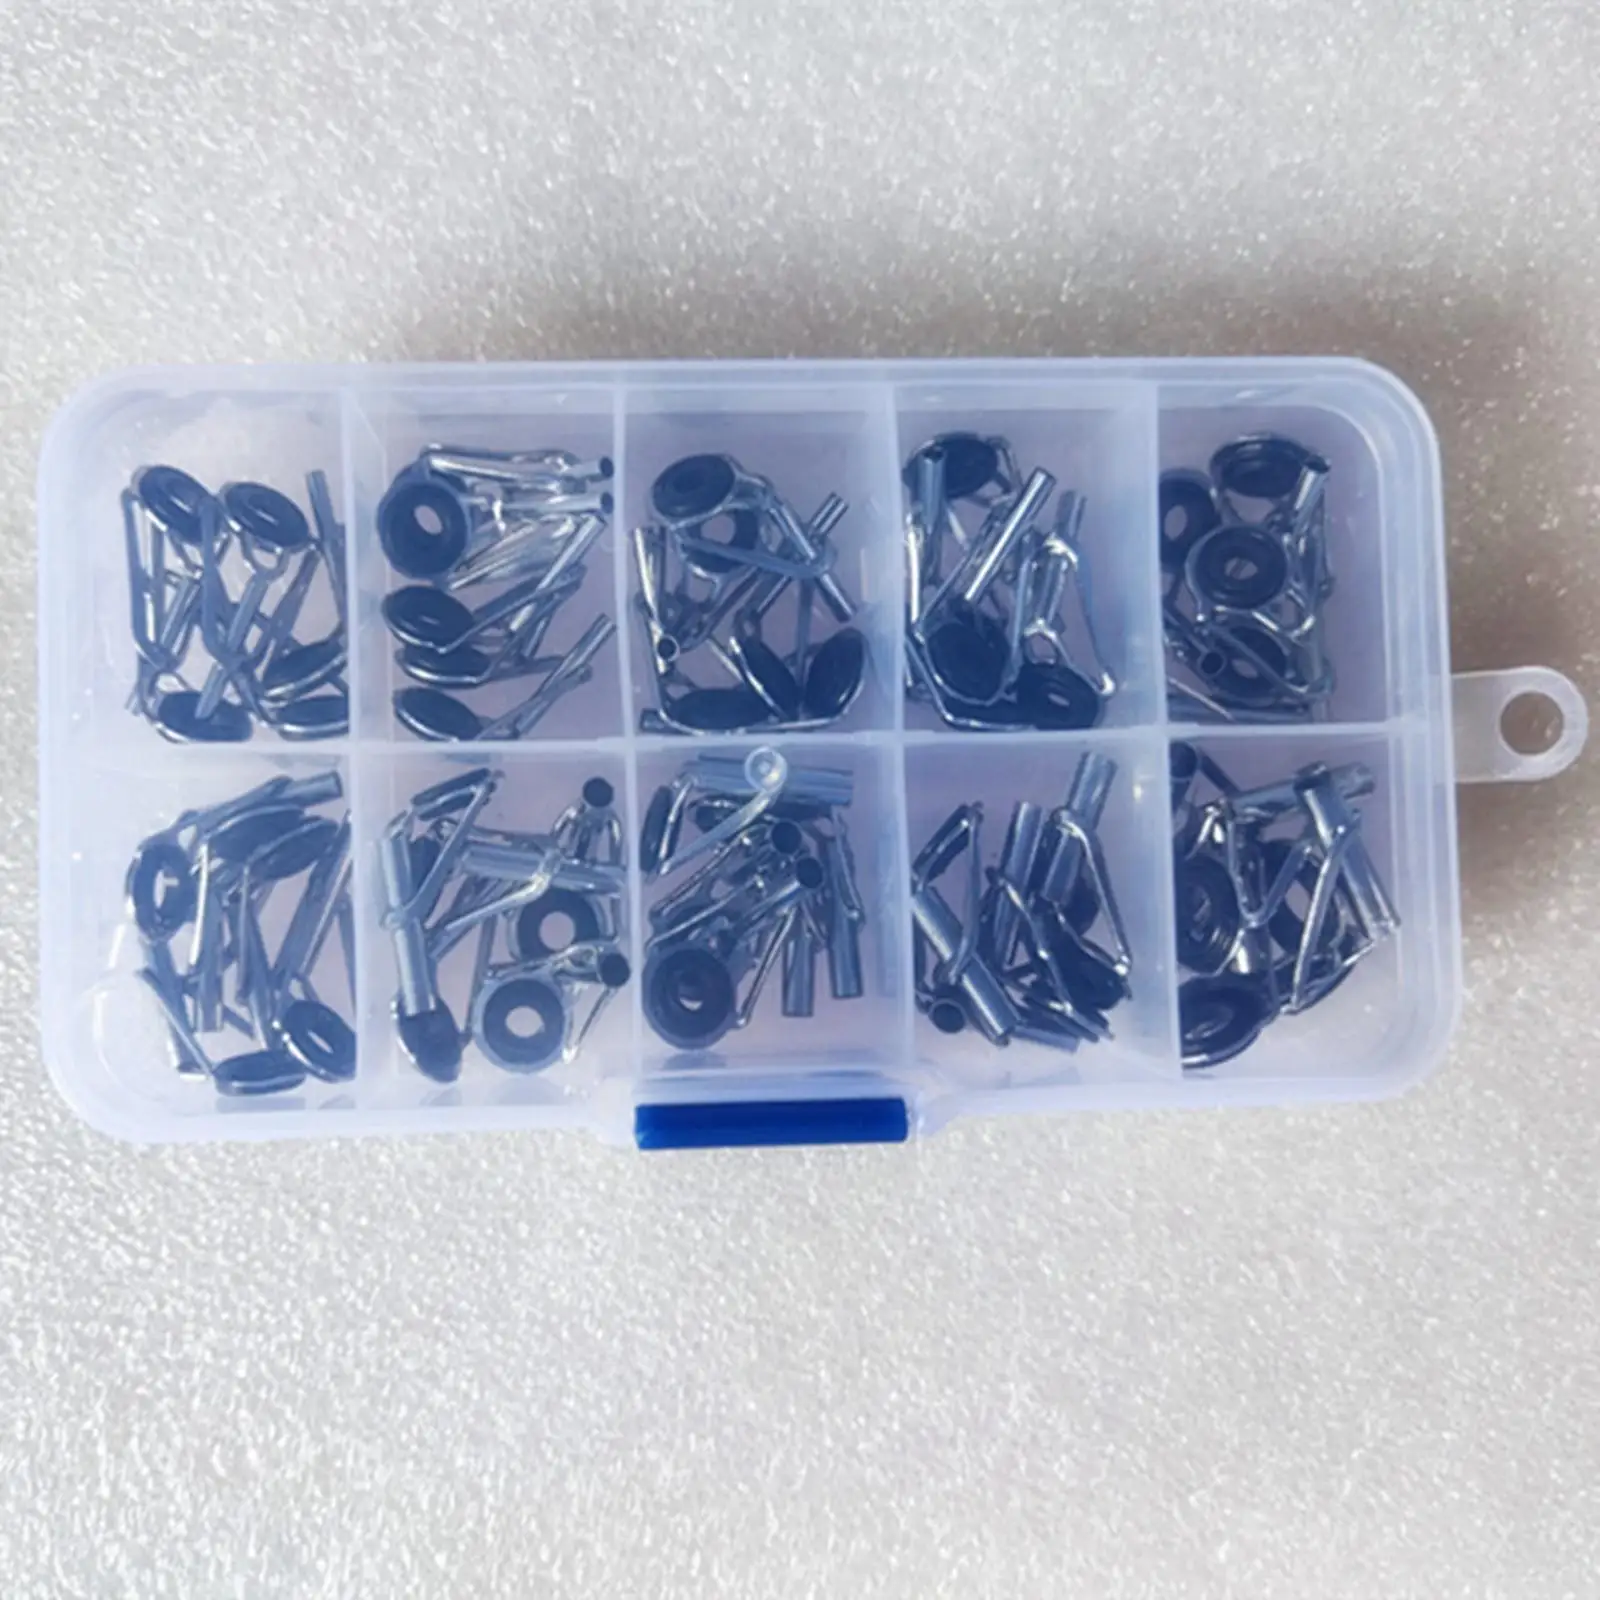 50Pcs Fishing Rod Guides Ring Set Mixed Size in A Box Lightweight Guides Replacement Sturdy Guides Line Rings for Rod Rebuilding